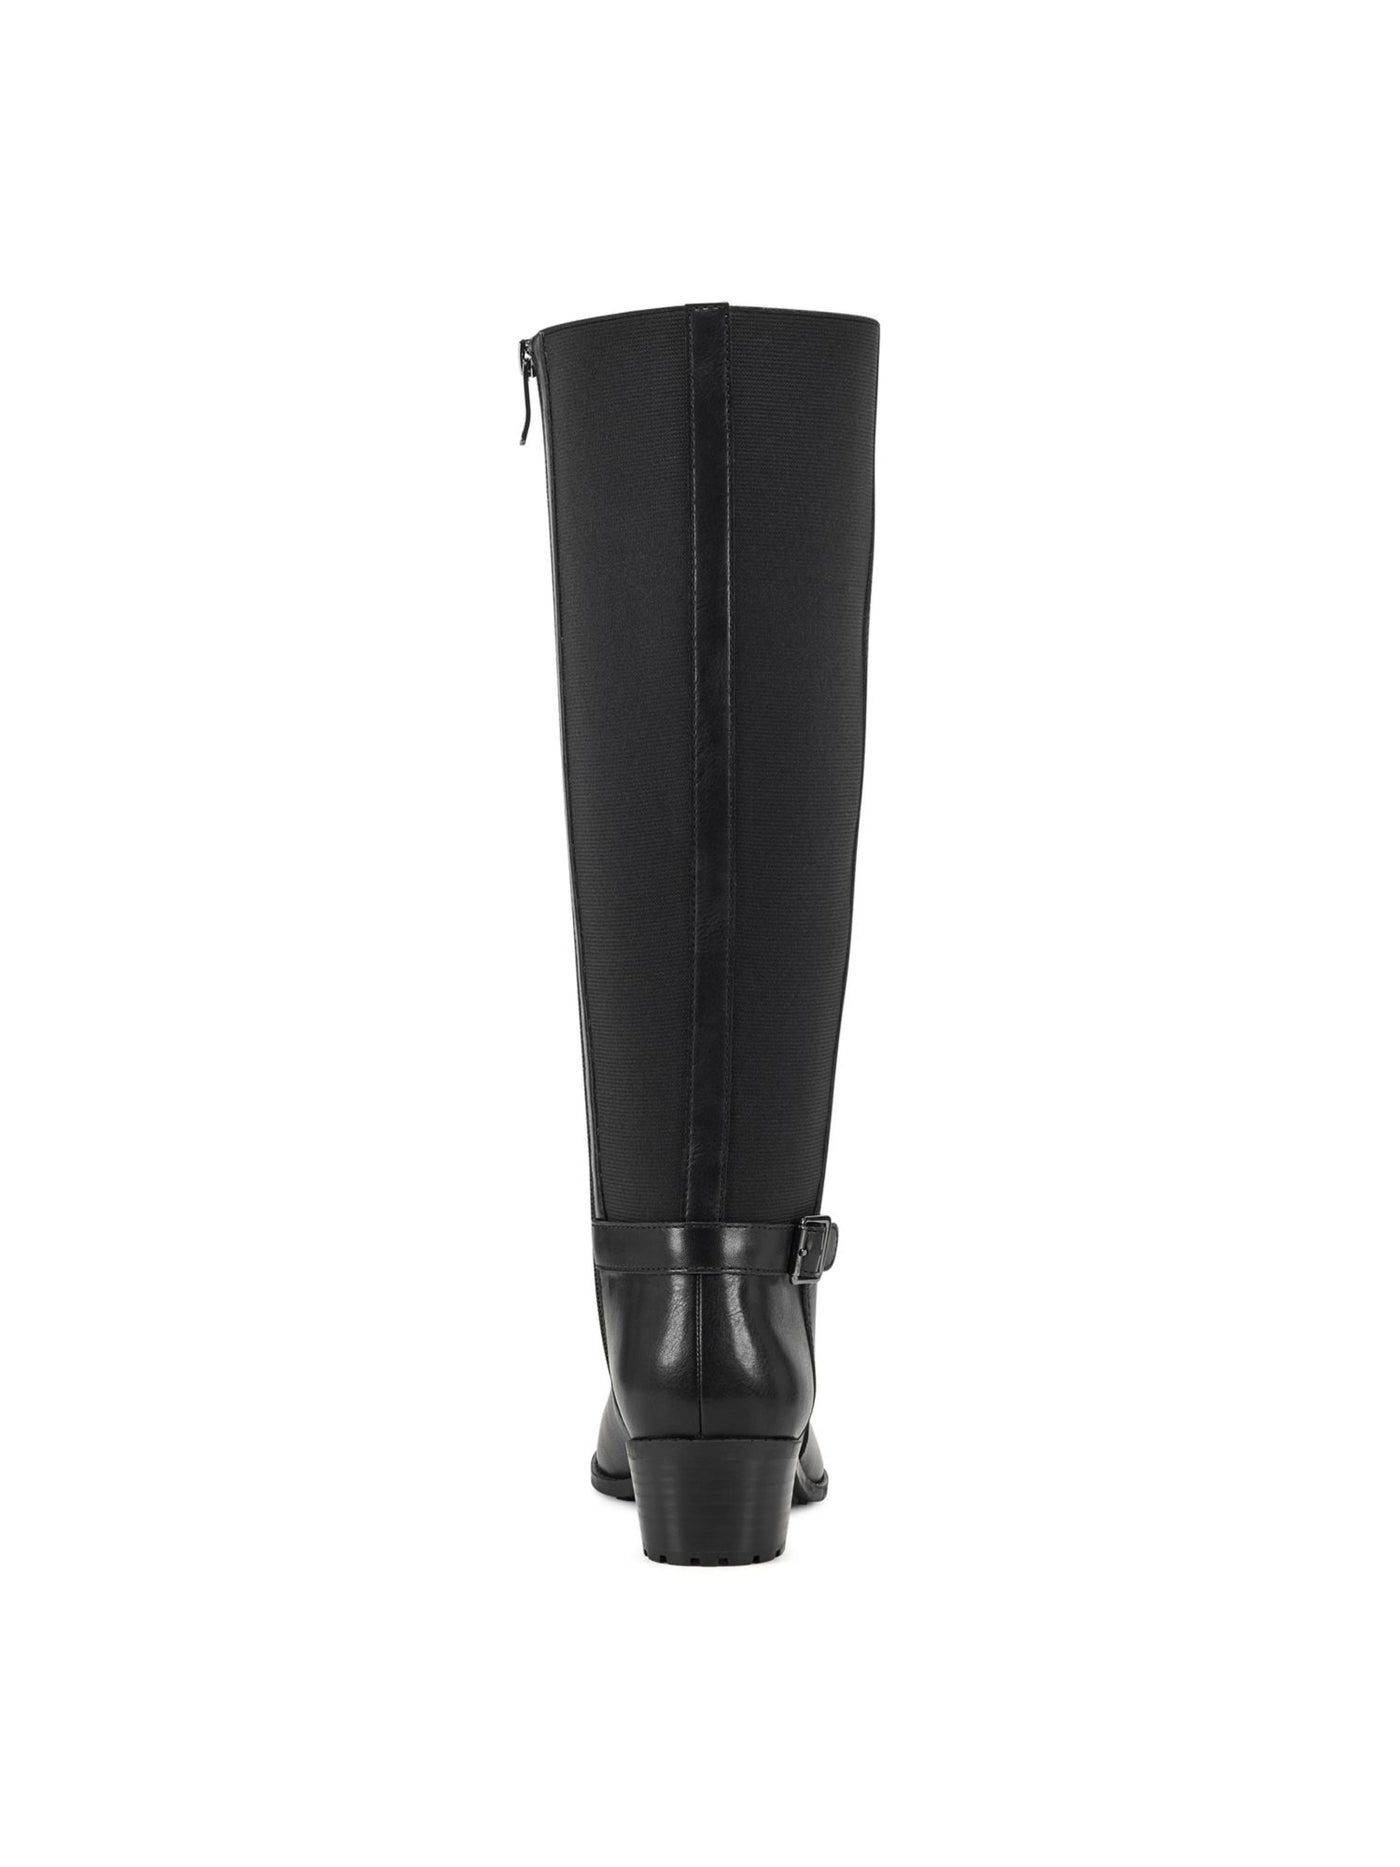 EASY SPIRIT Womens Black Wide Calf Arch Support Chaza Round Toe Block Heel Leather Riding Boot 8.5 W WC